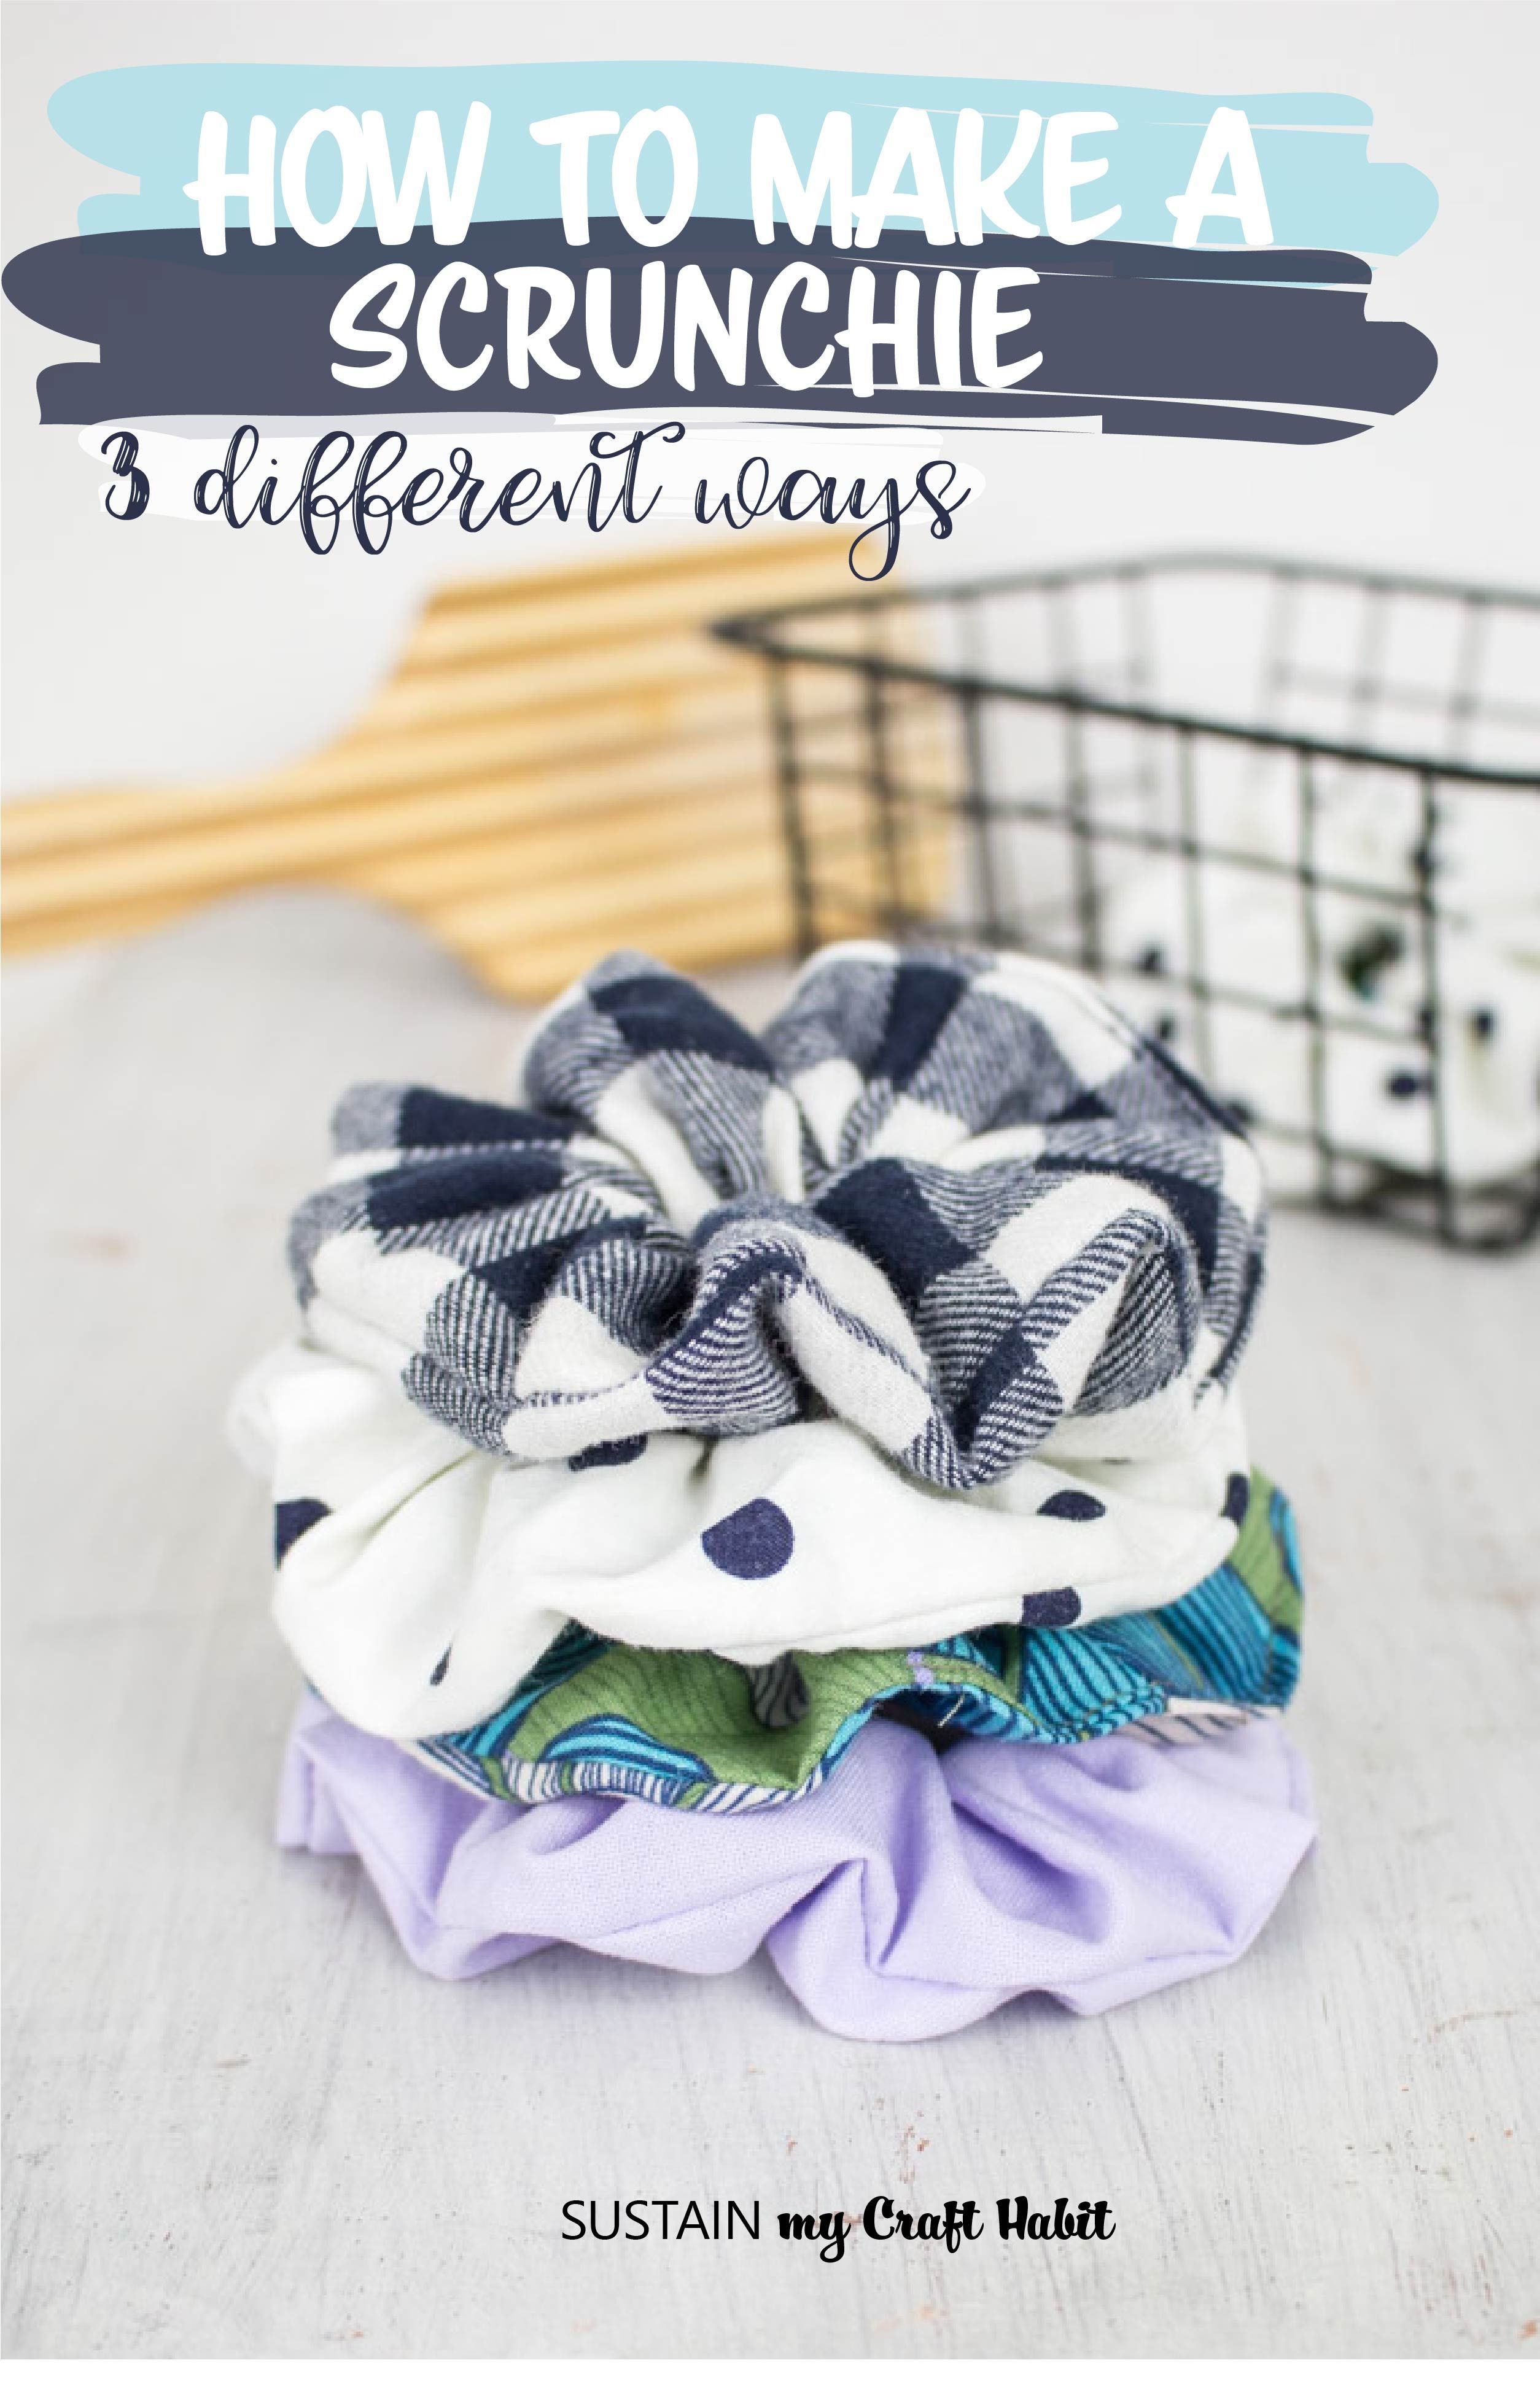 How to Make a Scrunchie 3 Different Ways - How to Make a Scrunchie 3 Different Ways -   fabric crafts diy no sew